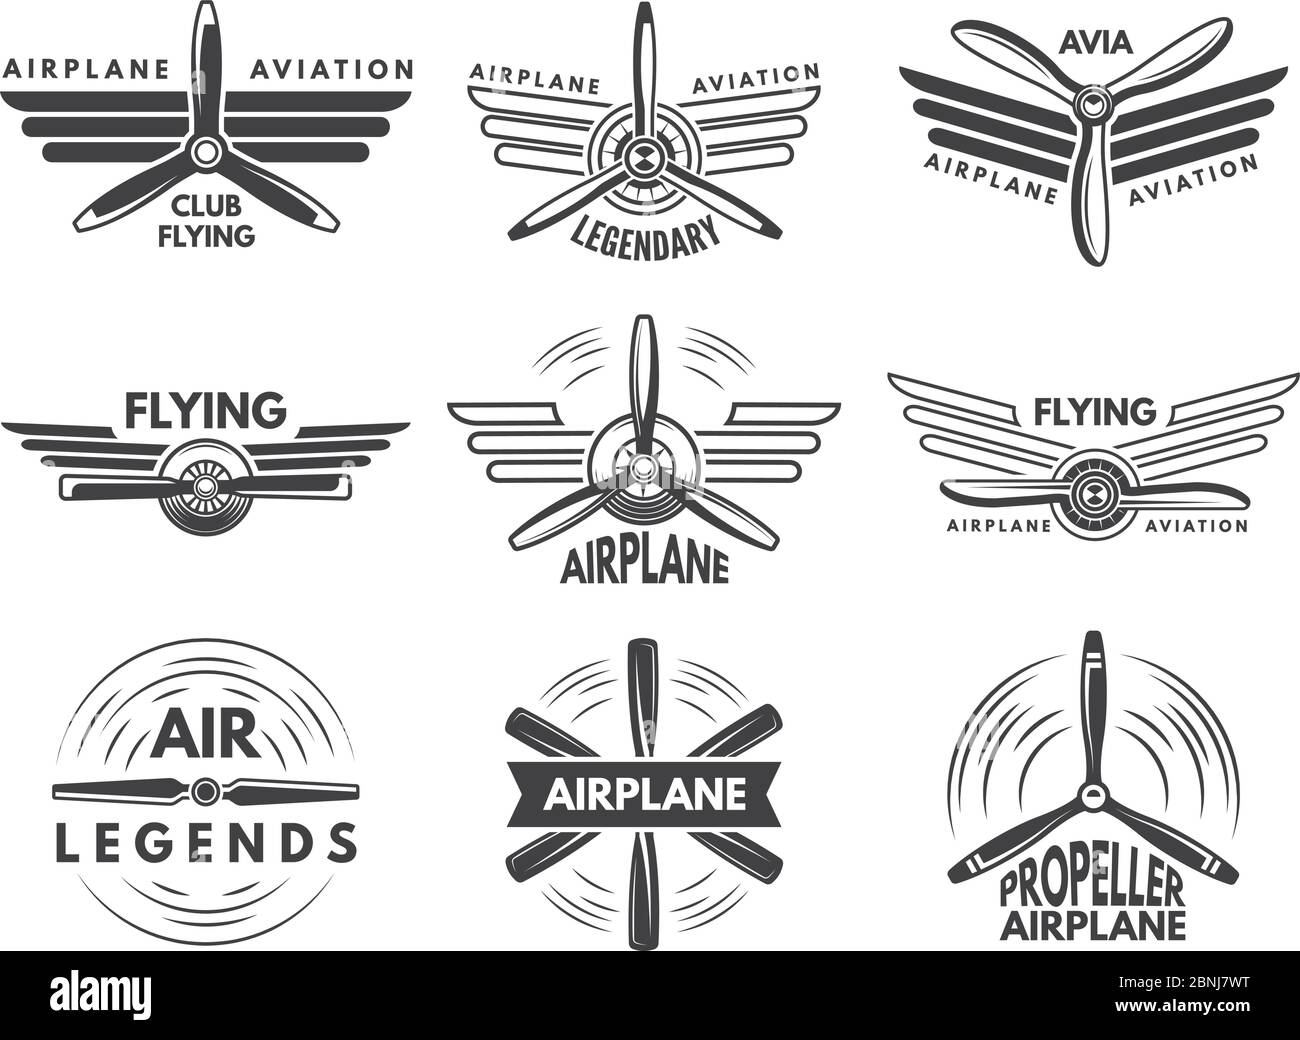 Labels an logos for military aviation. Aviator symbols in monochrome style Stock Vector